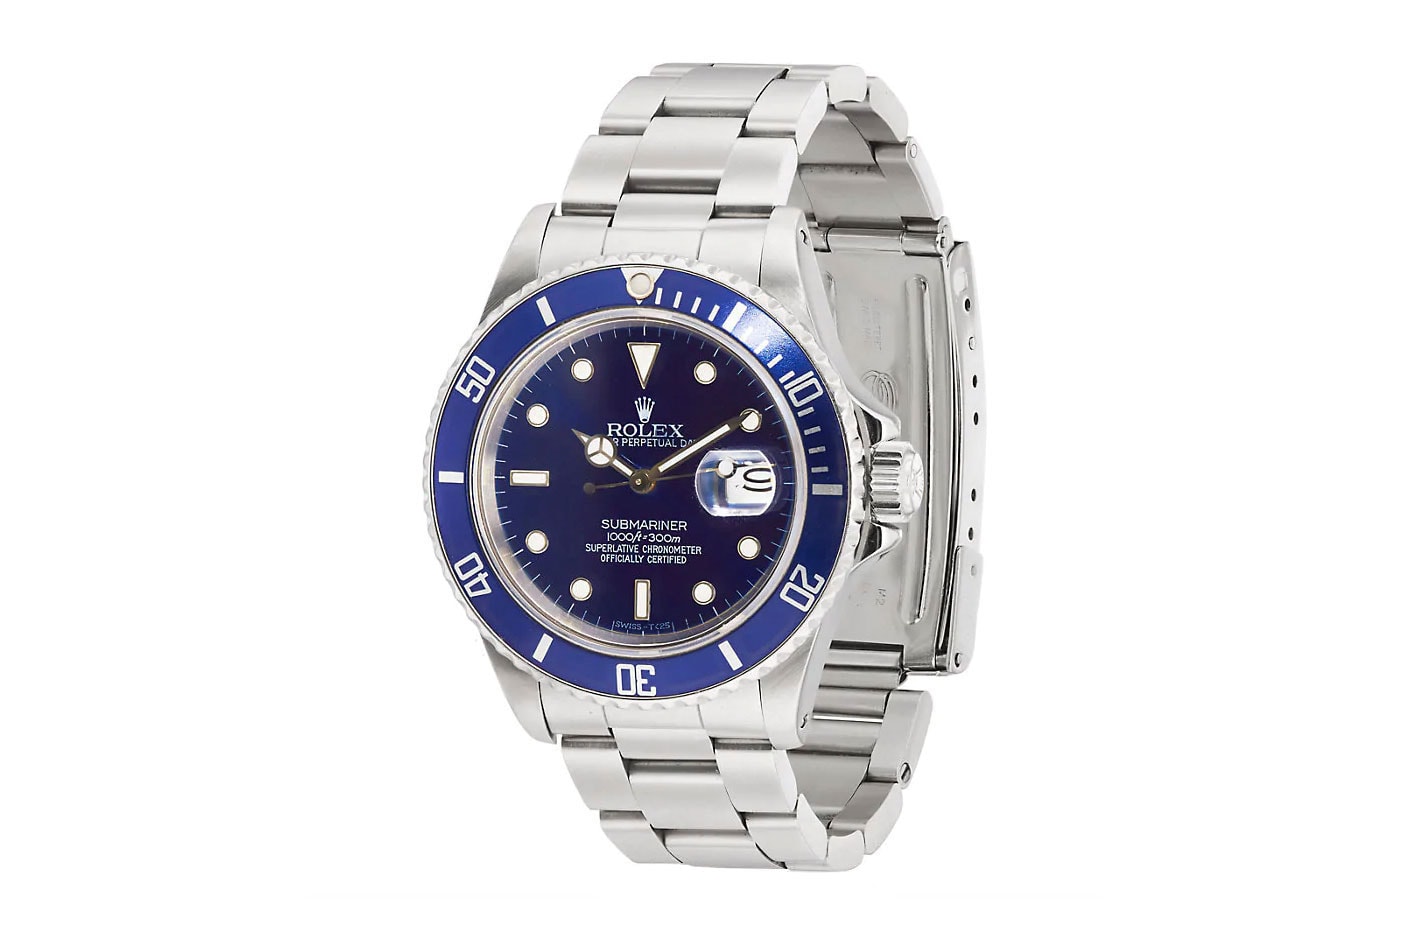 Rolex Submariner 1990 Perpetual Date Barneys sale sold 10900 usd price vintage rare blue case stainless steel case